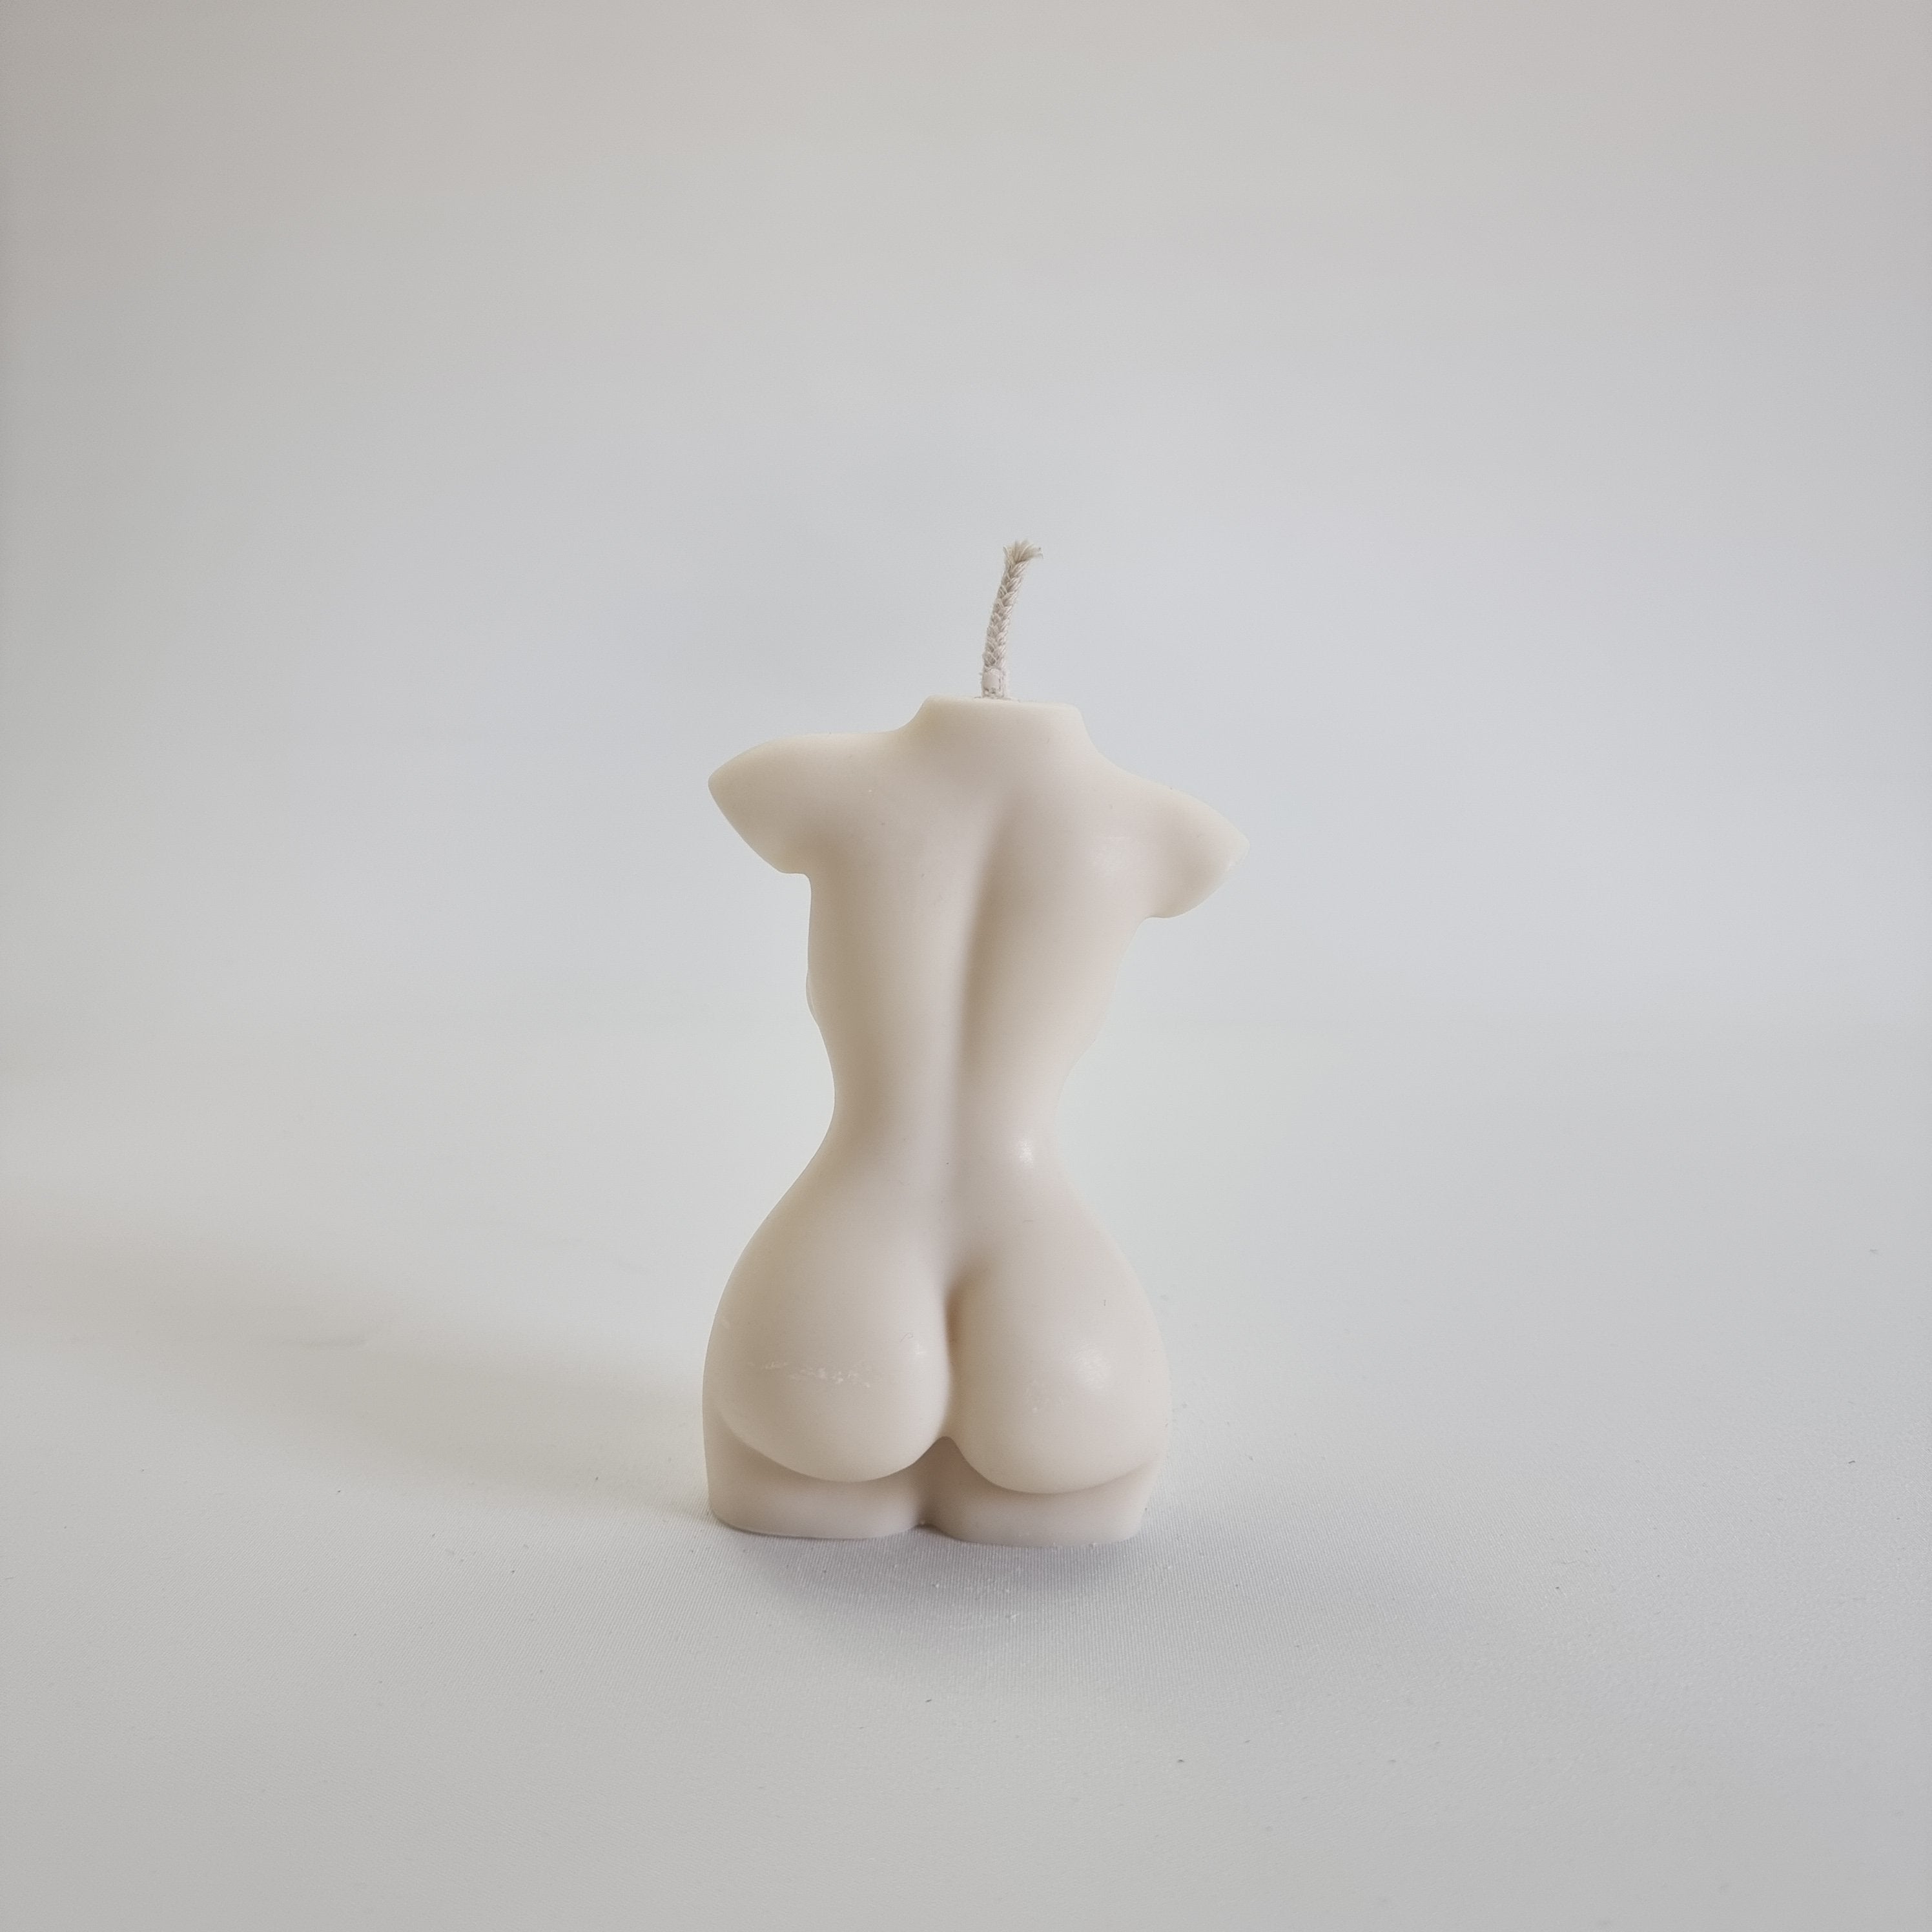 Curvy Female Body Candle Mould (L) - 16cm 2 - Silicone Mould, Mold for DIY Candles. Created using candle making kit with cotton candle wicks and candle colour chips. Using soy wax for pillar candles. Sold by Myka Candles Moulds Australia